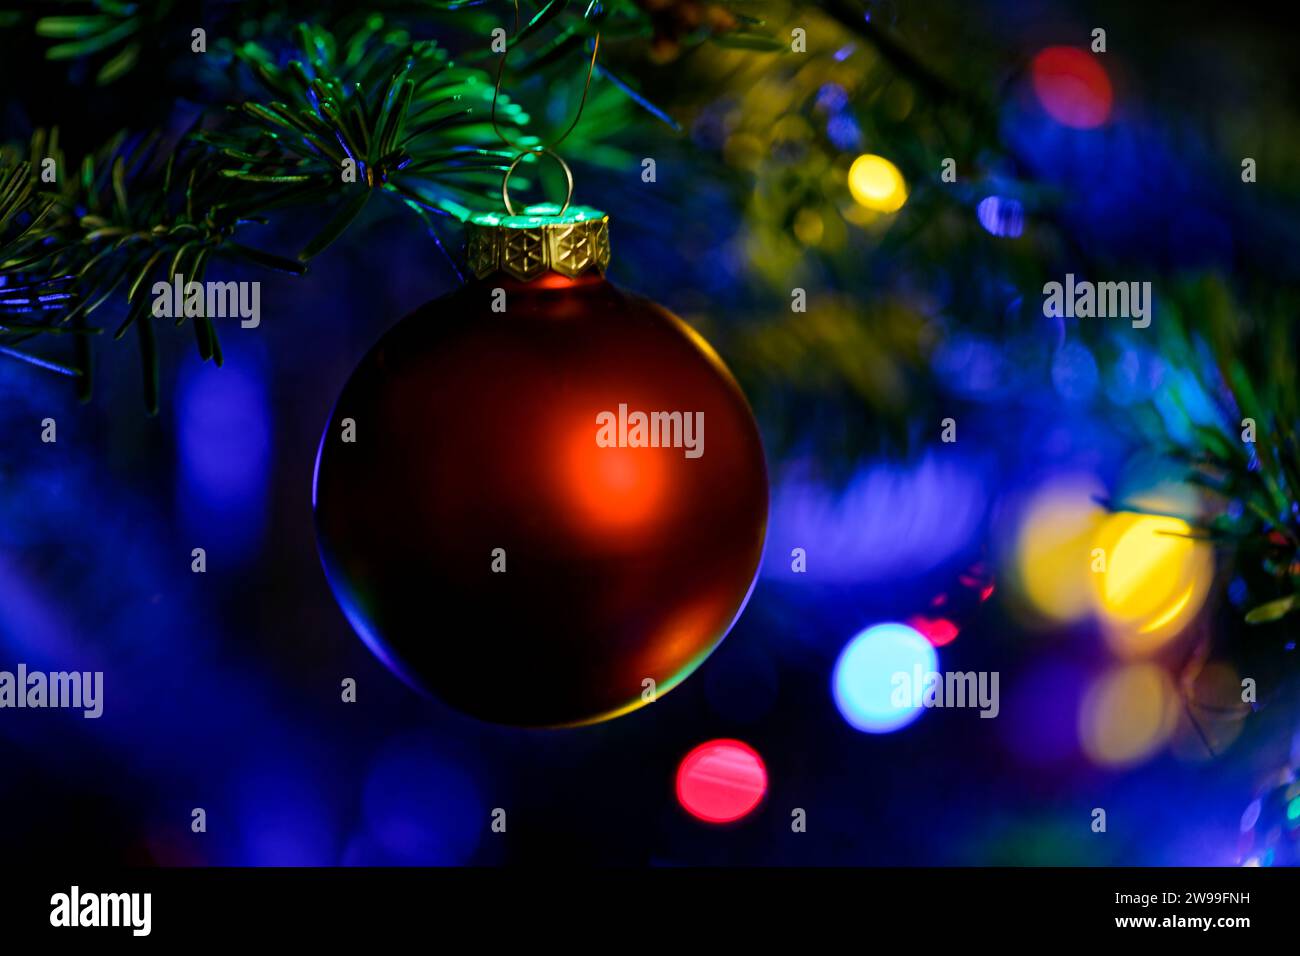 A red Christmas ornament hangs from a tree, illuminated by the vibrant lights of the festive season Stock Photo